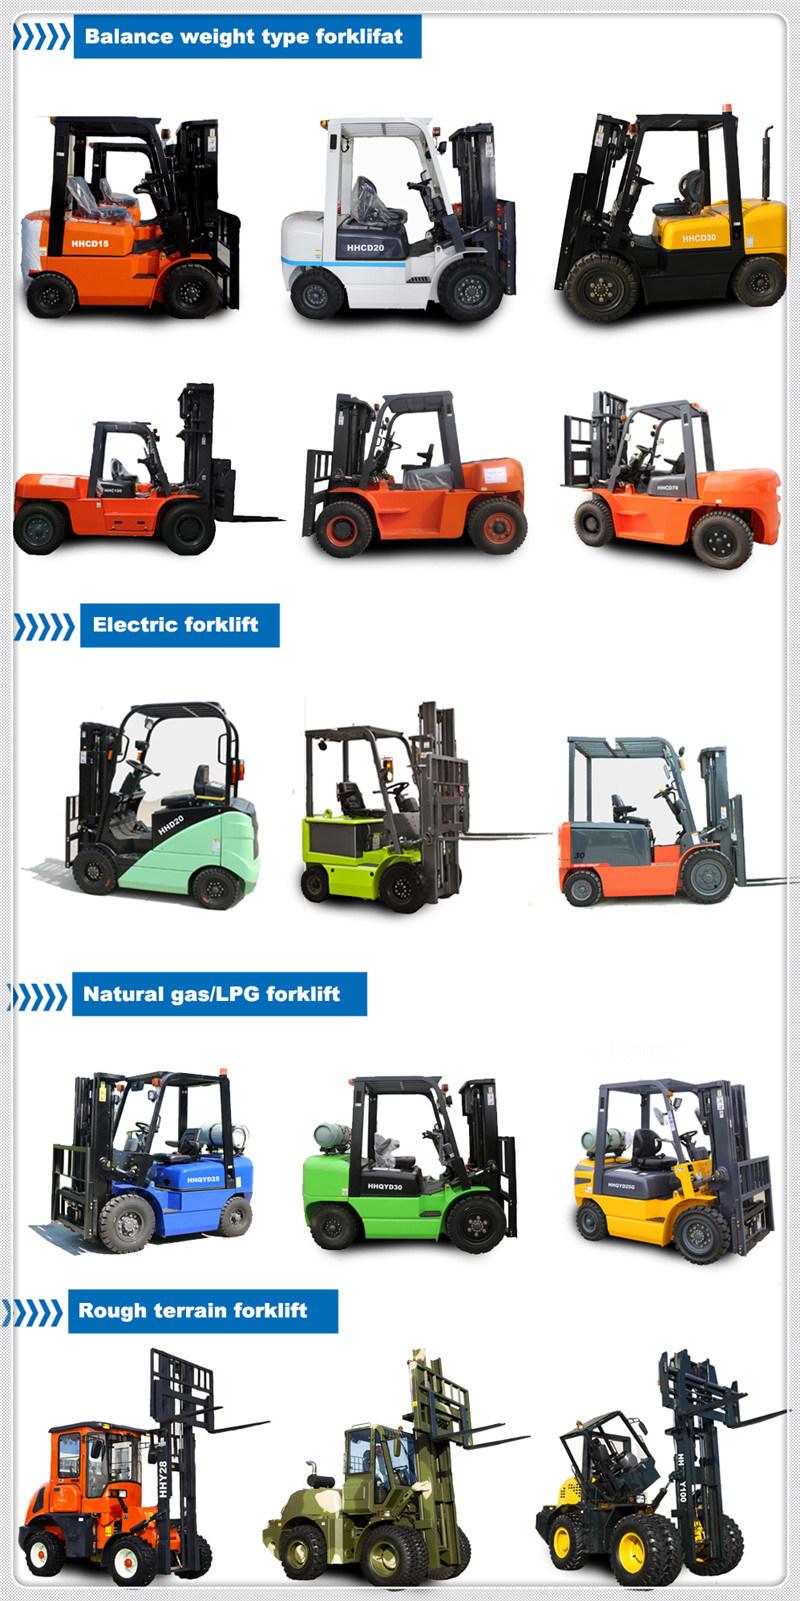 Best Selling 5ton Capacity China Diesel Forklift